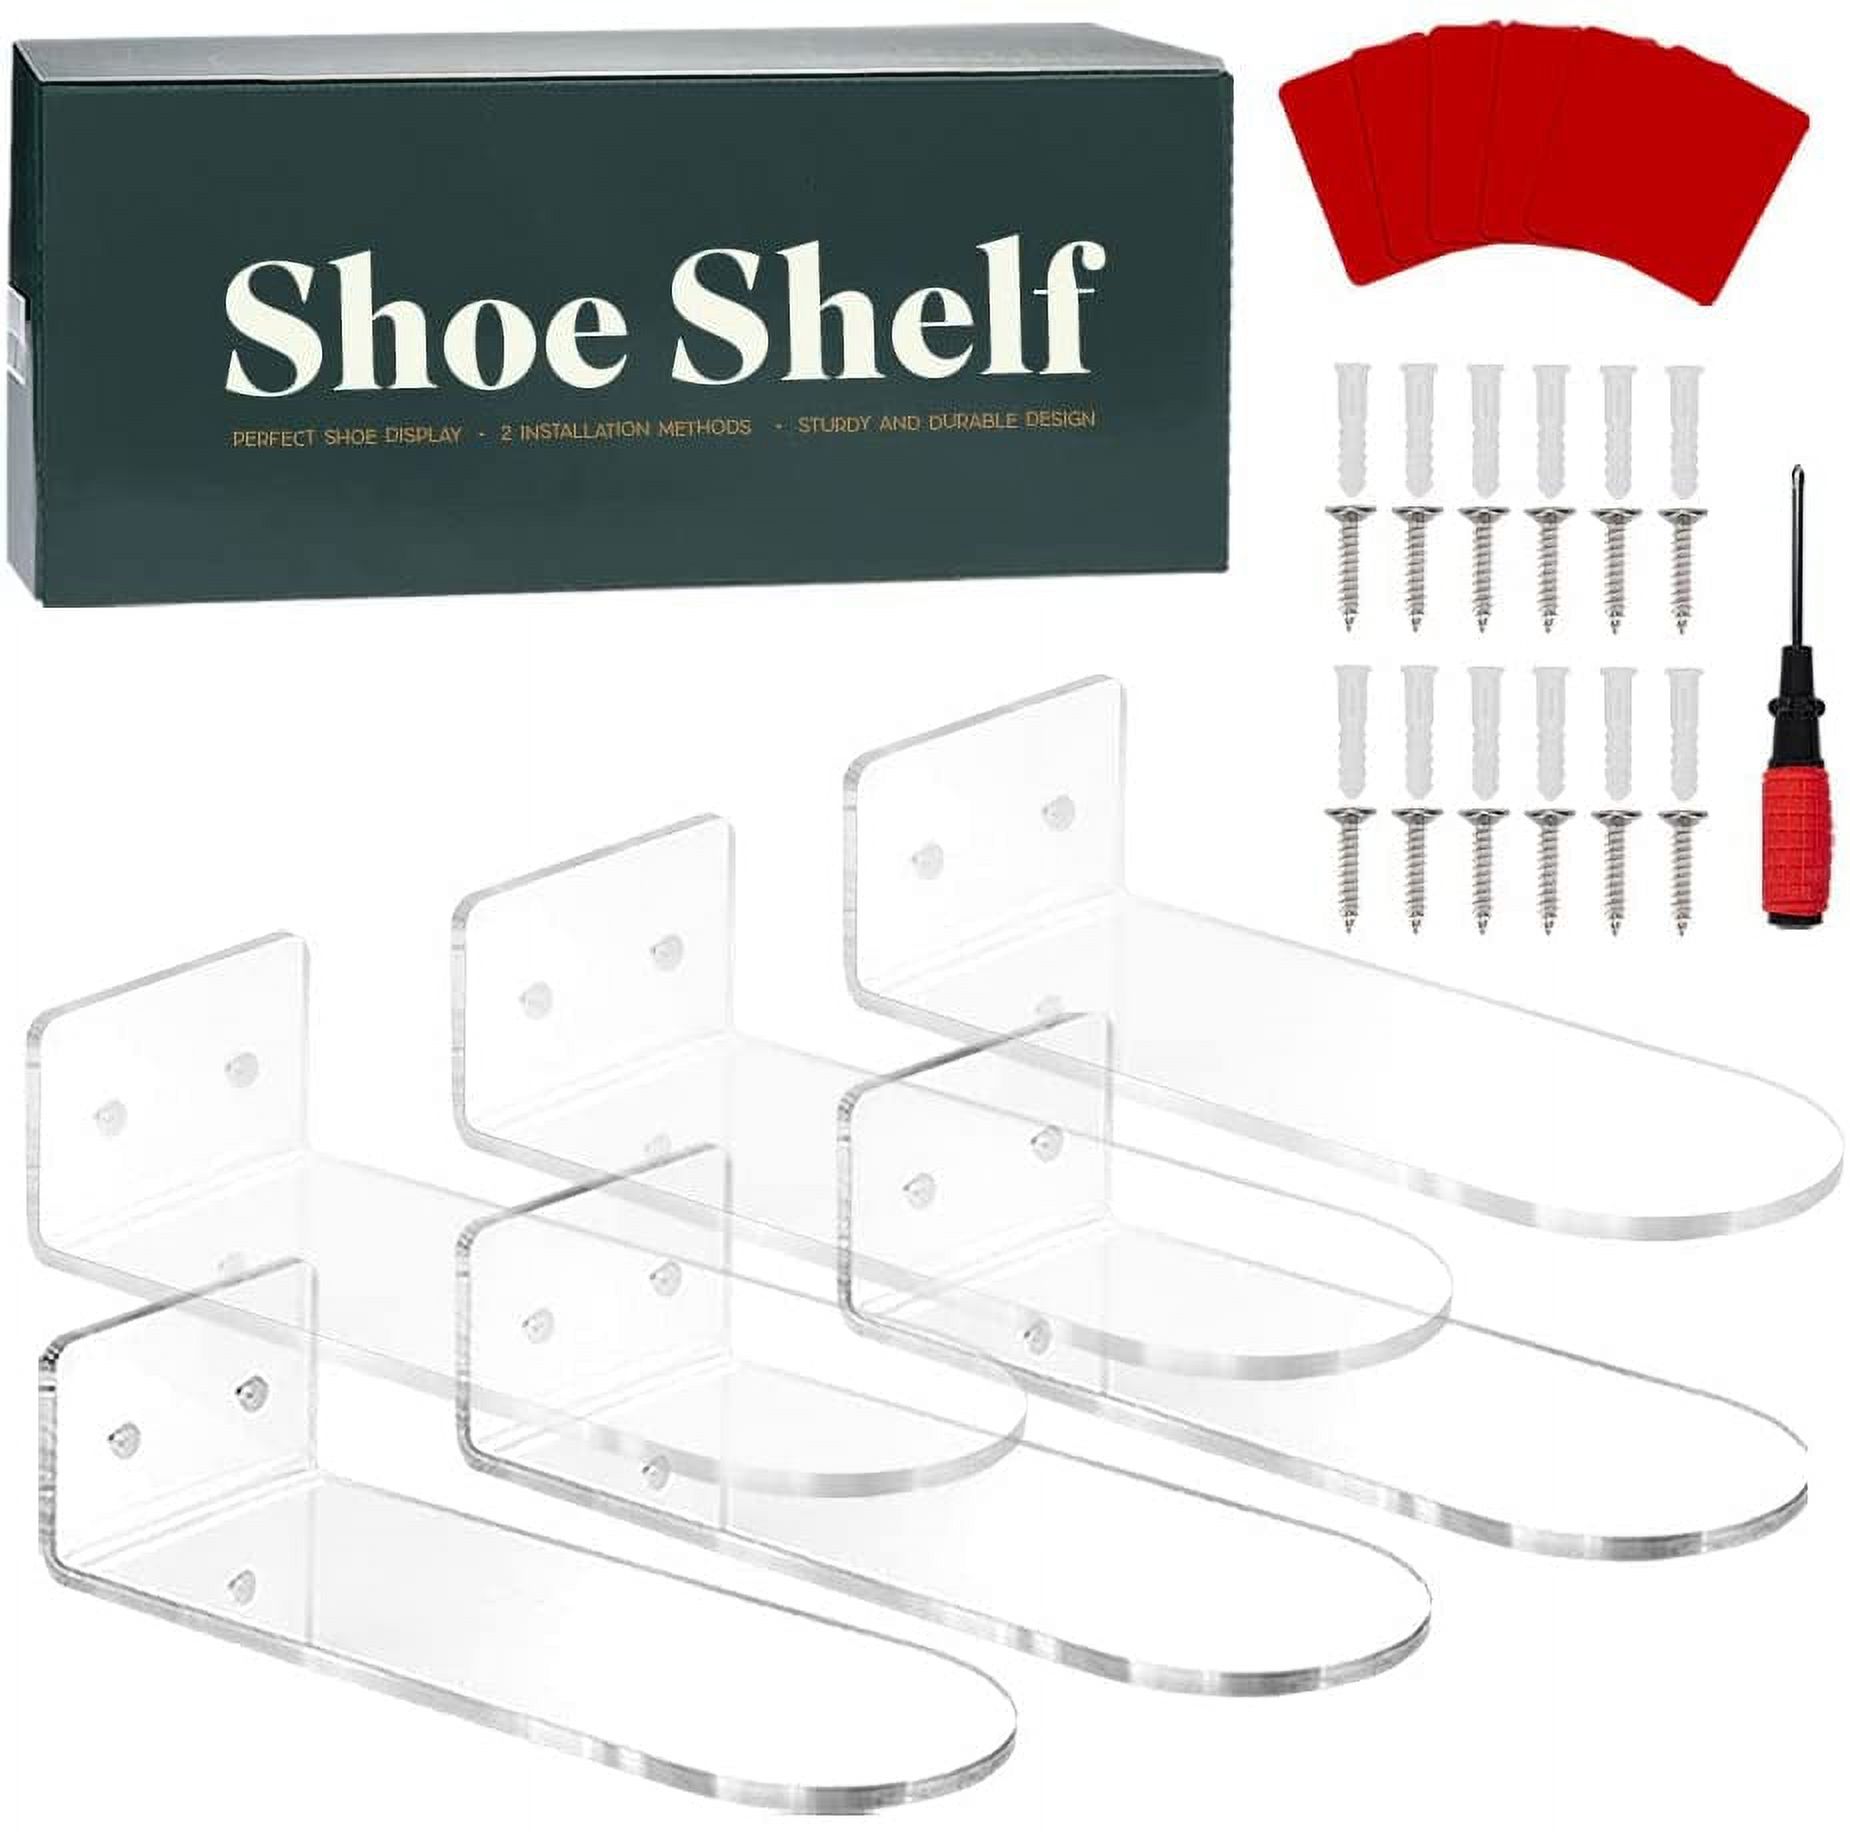 Cozyside Floating Shoes Display Stand - For 3 Pair of Shoes Shelves for Wall - Sneaker Levitation Display Wall Shelf - image 1 of 9